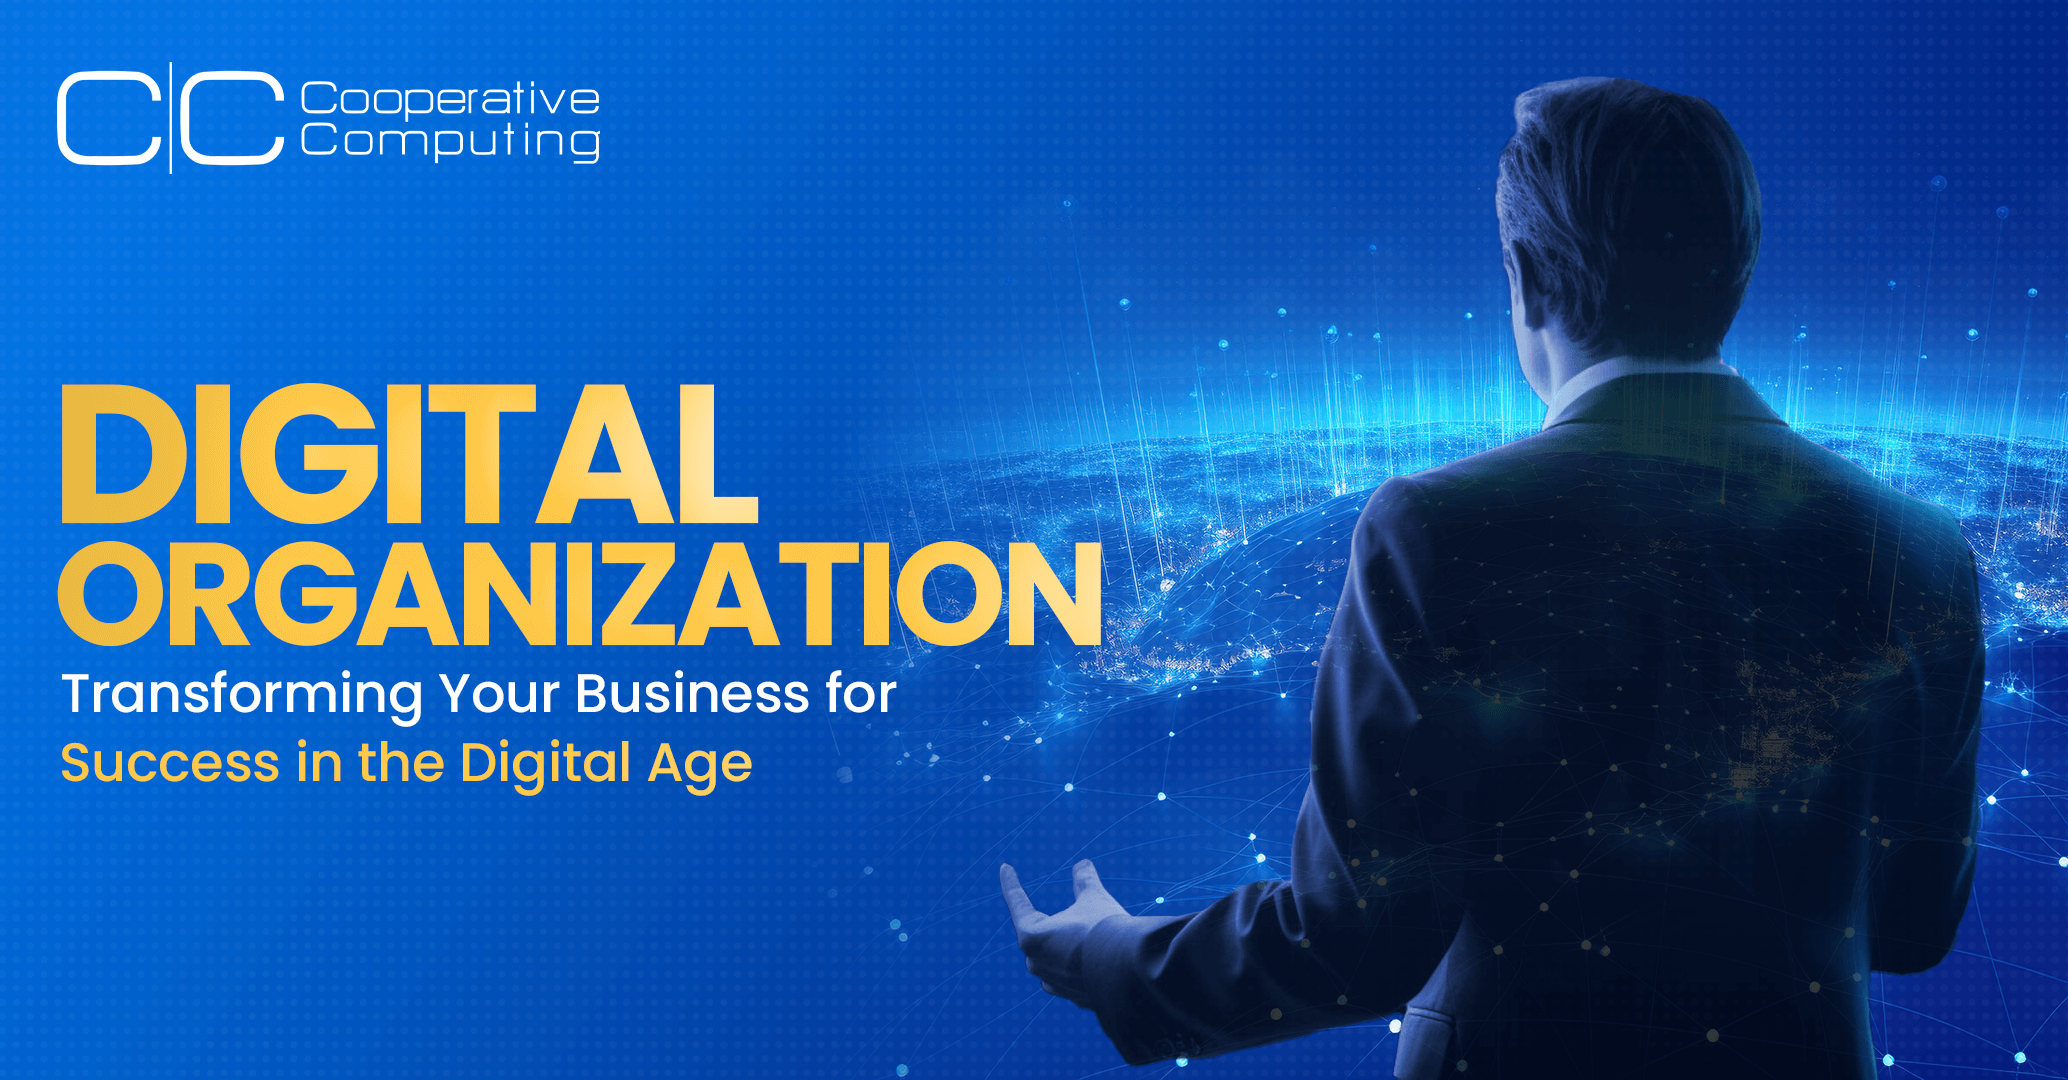 Digital Organization: Transforming Your Business for Success in the Digital Age